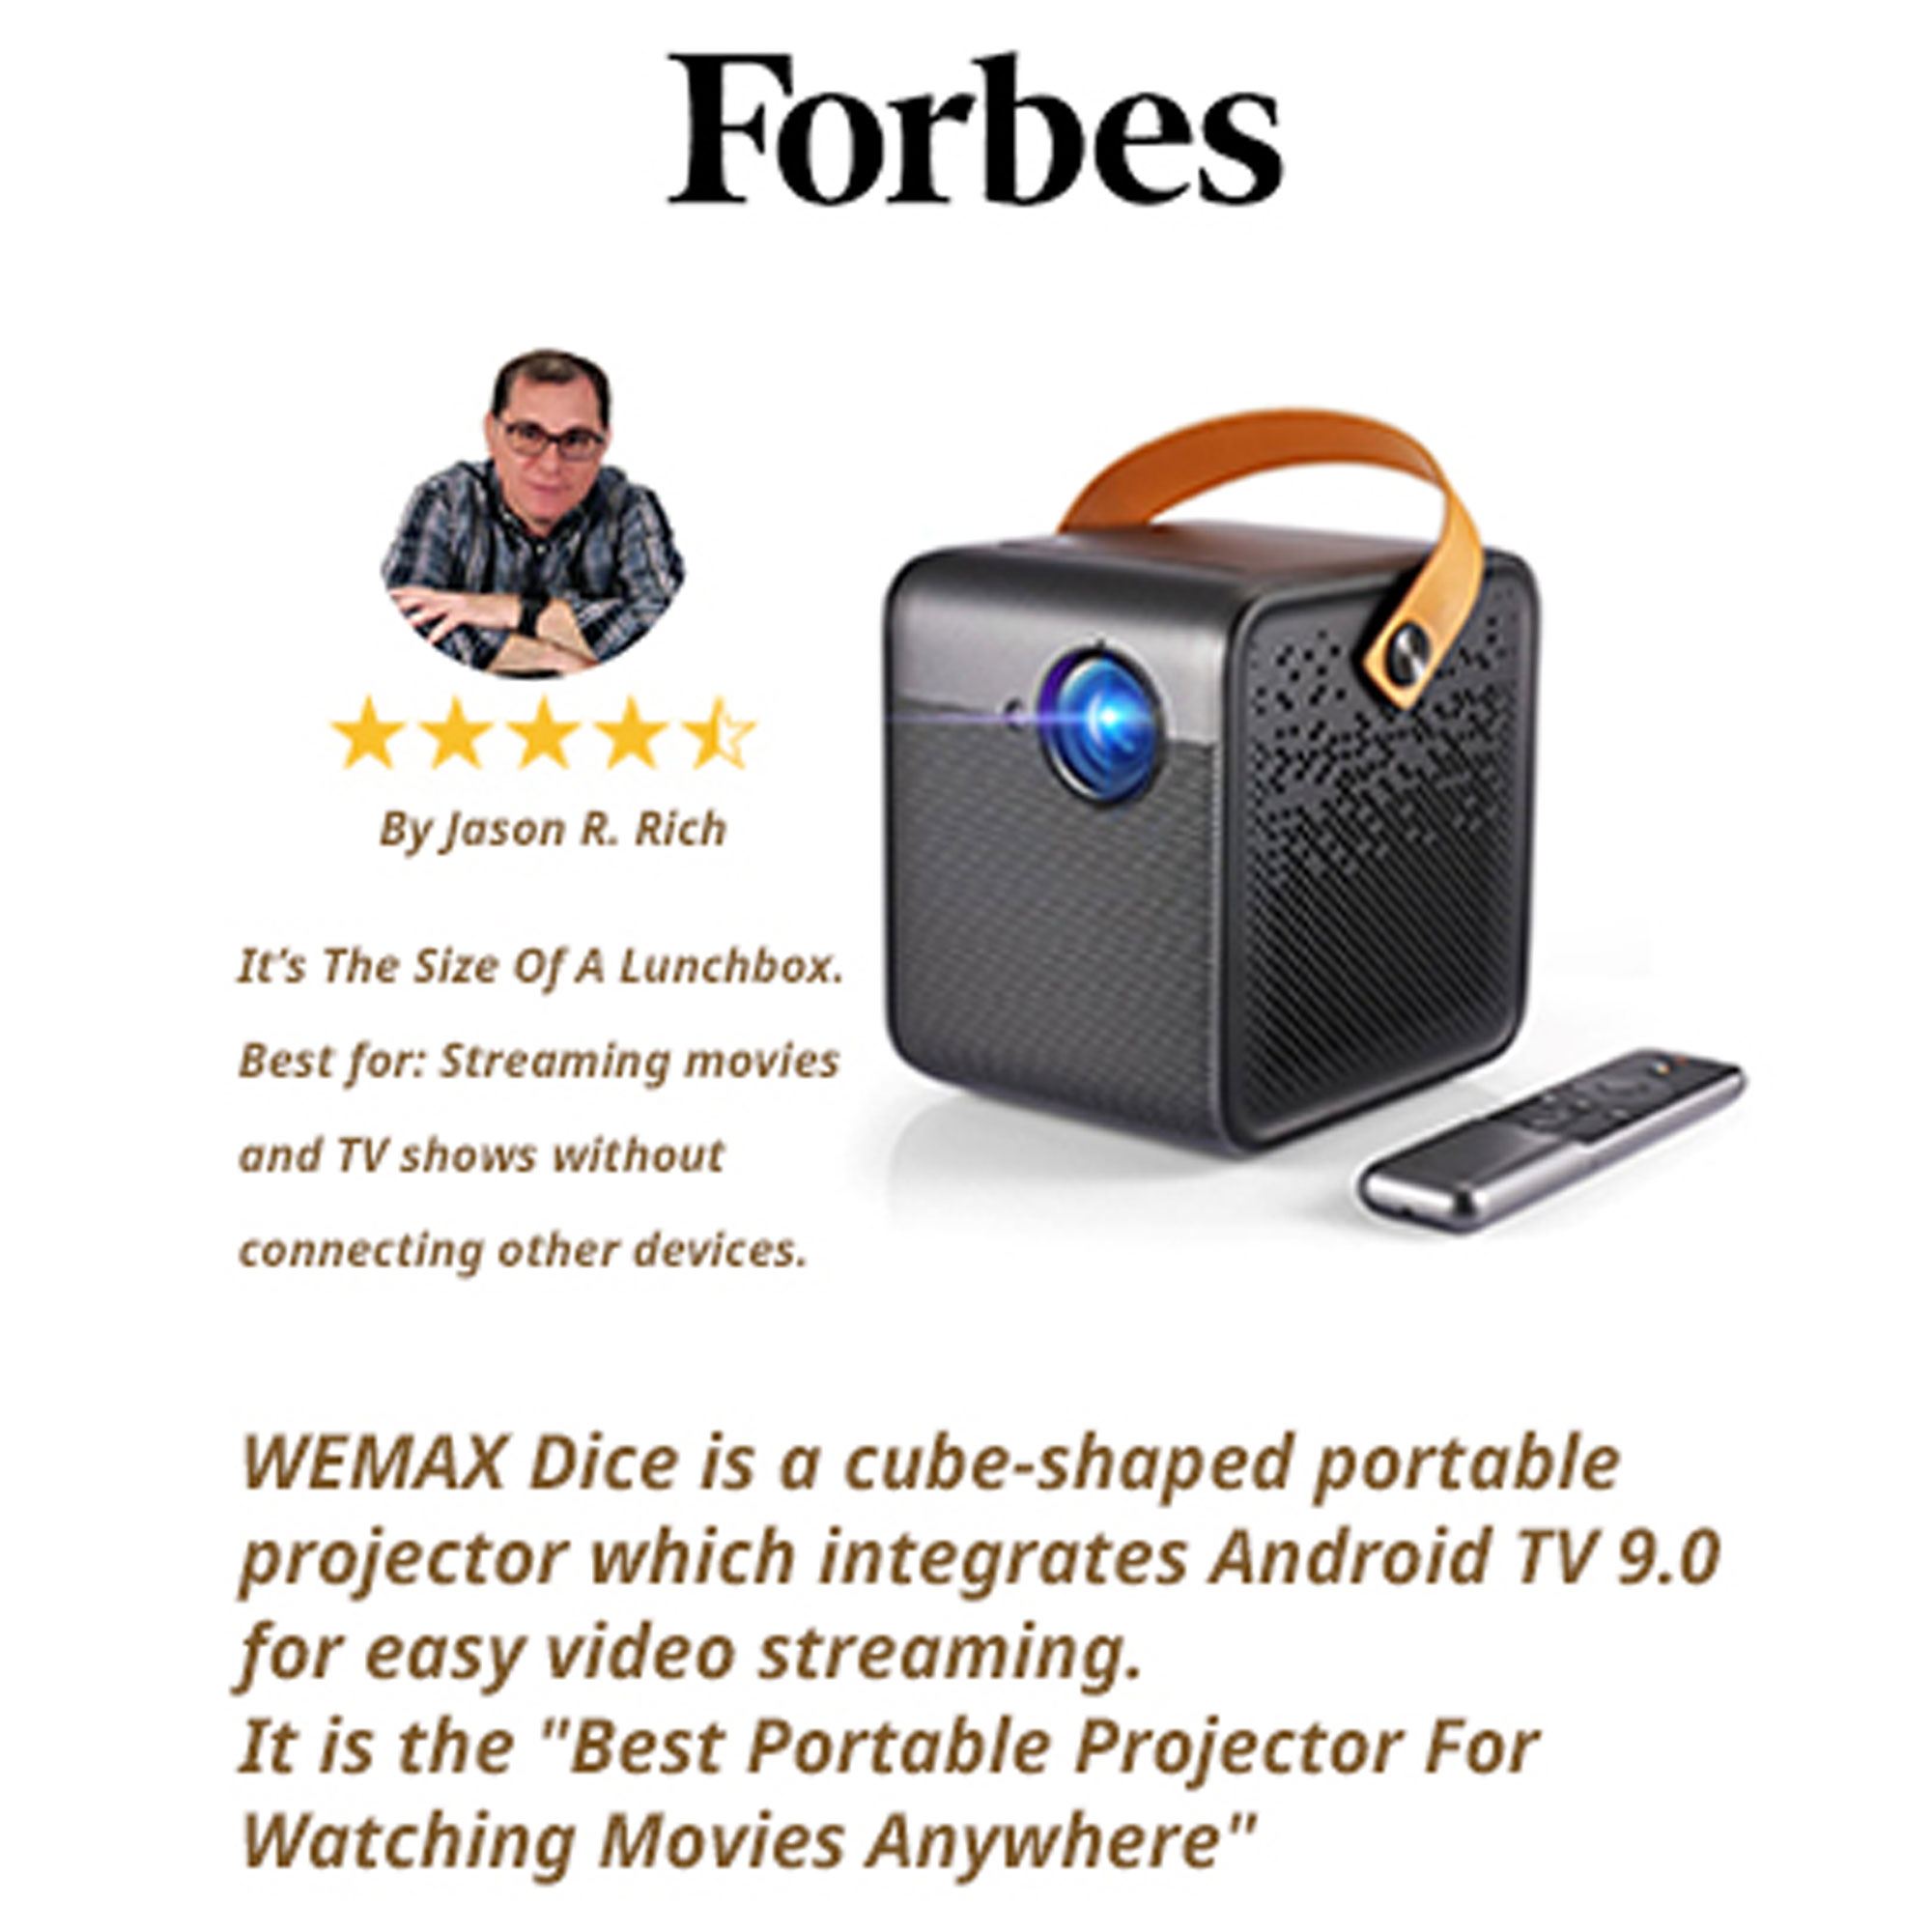 WEMAX Dice Outdoor Portable Projector, Android TV Movie Projector, 3 Hours Battery, 700 ANSI Lumens, Mobile Theater, WiFi Bluetooth HDMI USB, Dolby Audio DTS-HD, Auto Focus, Auto Keystone - image 4 of 10